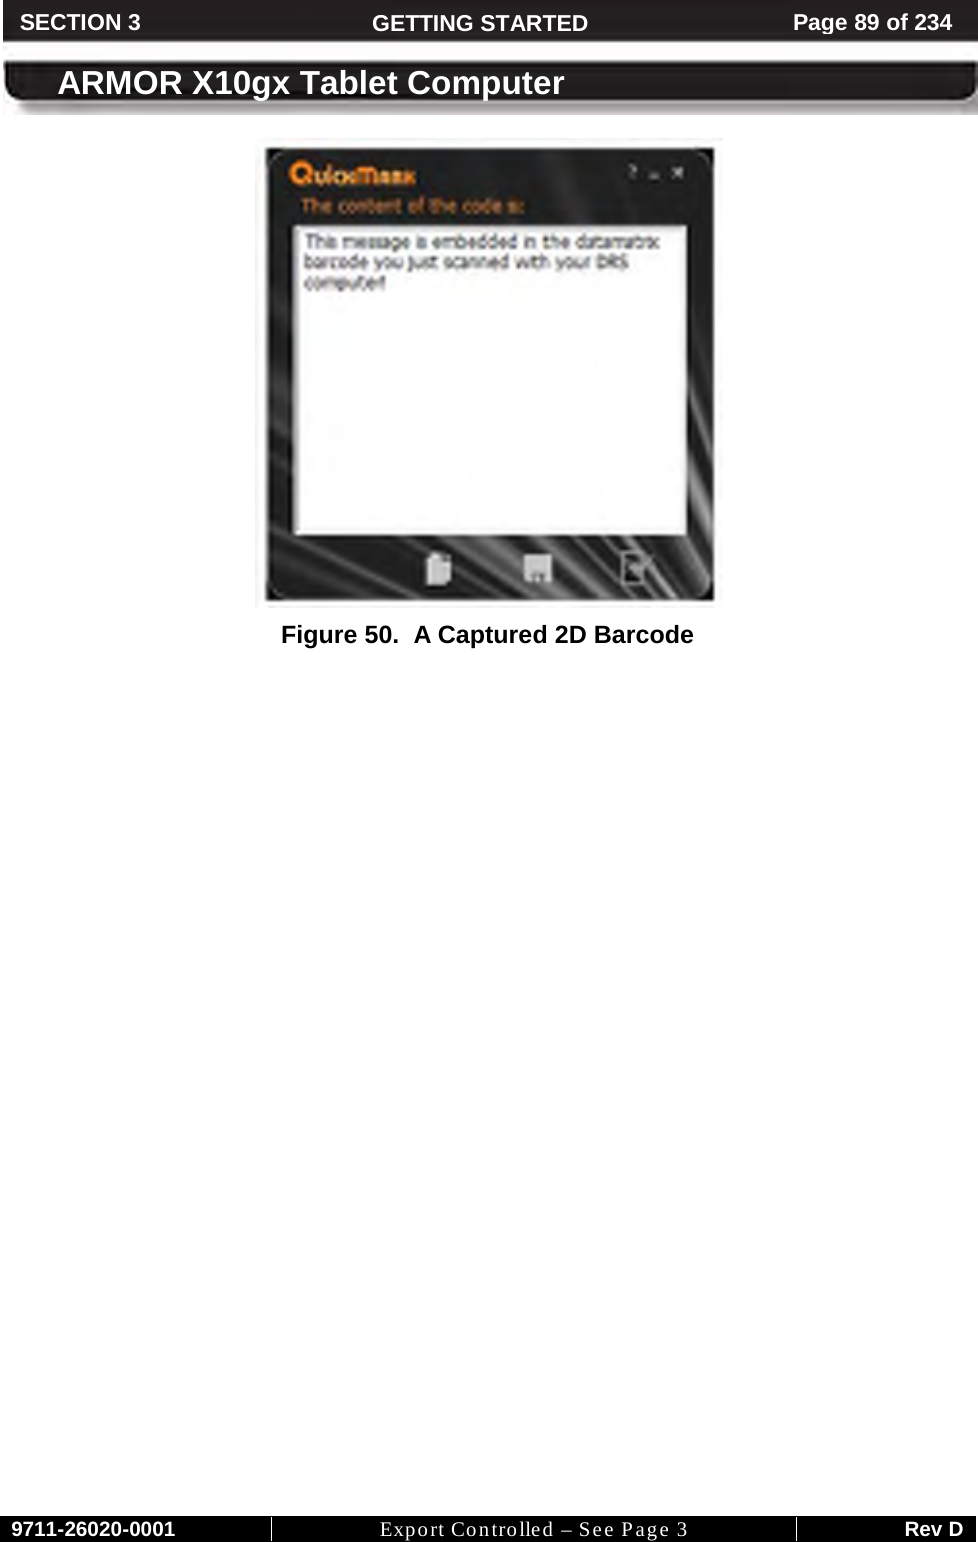     9711-26020-0001 Export Controlled – See Page 3 Rev D SECTION 3 GETTING STARTED Page 89 of 234  ARMOR X10gx Tablet Computer  Figure 50.  A Captured 2D Barcode   